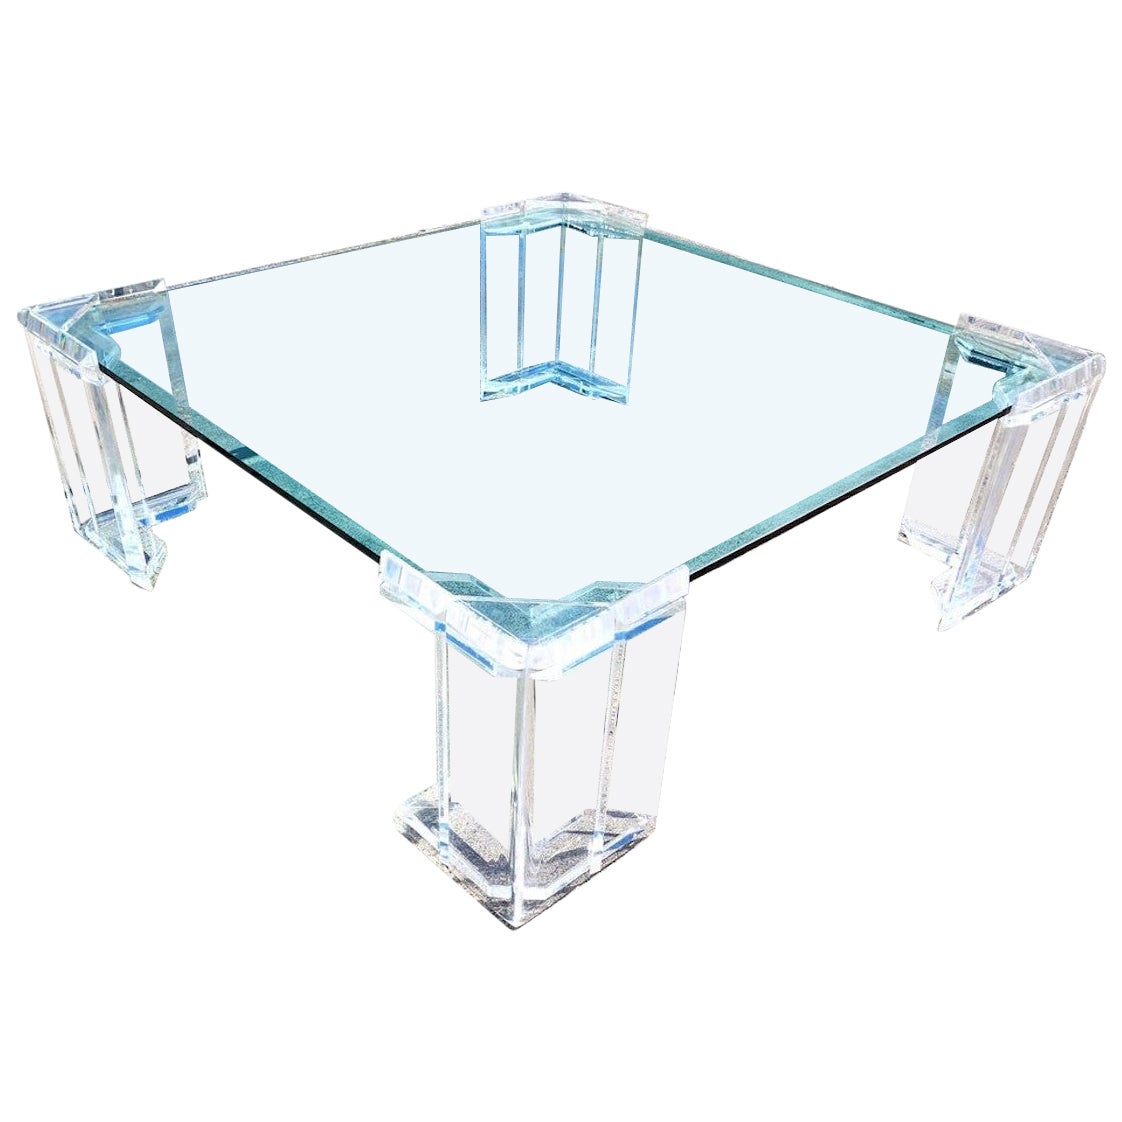 MCM Lucite Cocktail Table 1970s